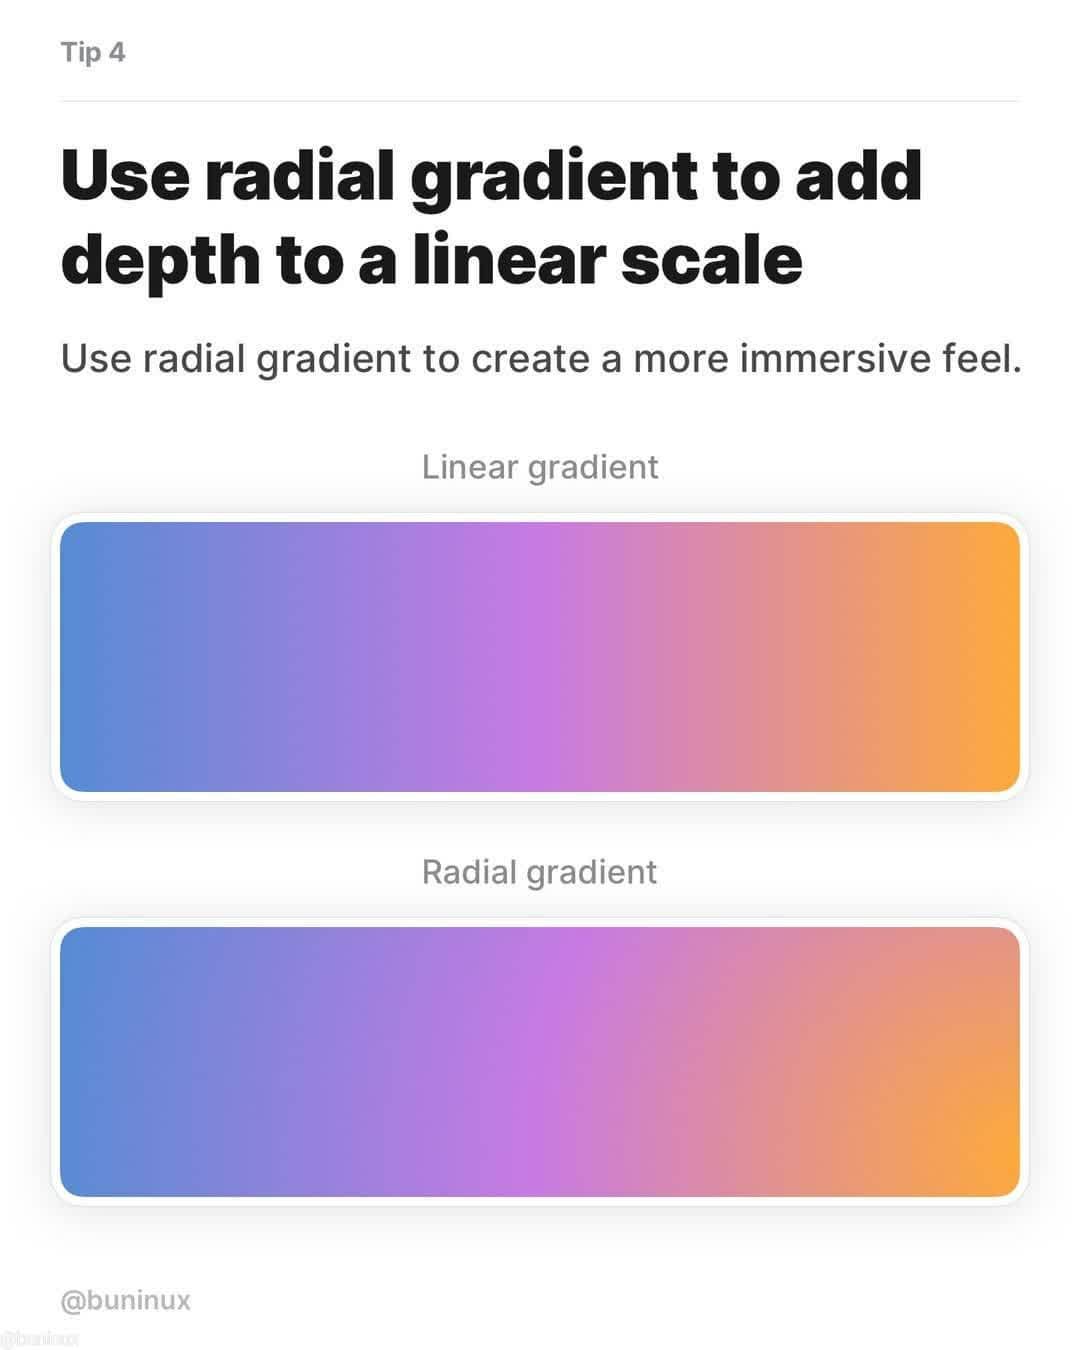 Tip 4 - Use radial gradient to add depth to a linear scale